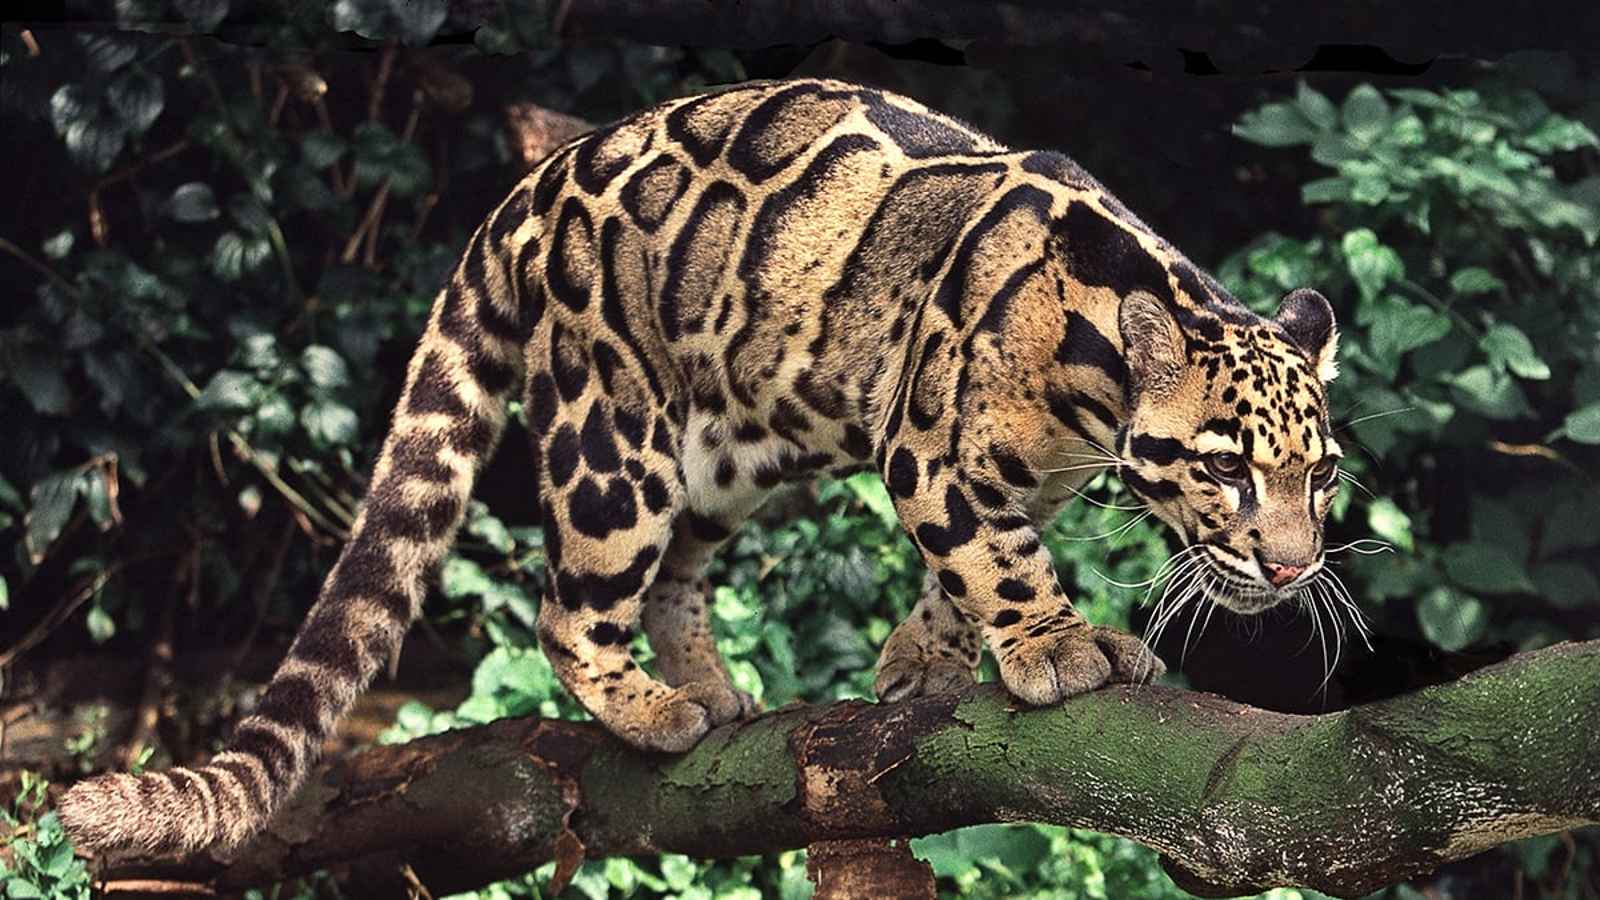 International Clouded Leopard Day 2023: Date, History, Facts about Clouded Leopard